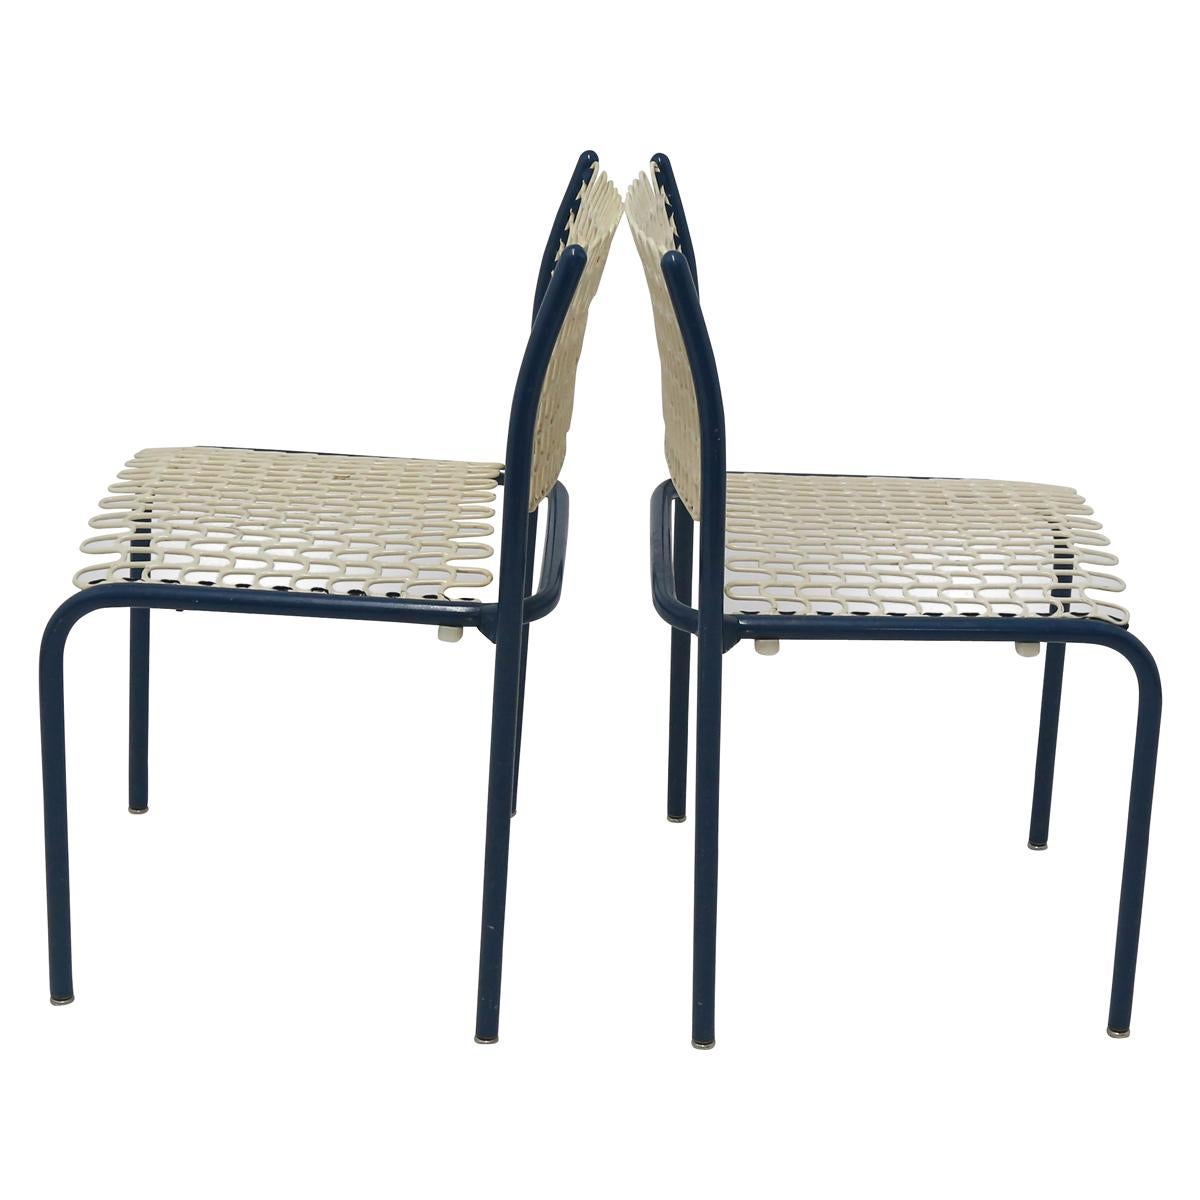 American Set of Four Modernist Indoor/Outdoor Chairs with Mesh Seats and Backs For Sale